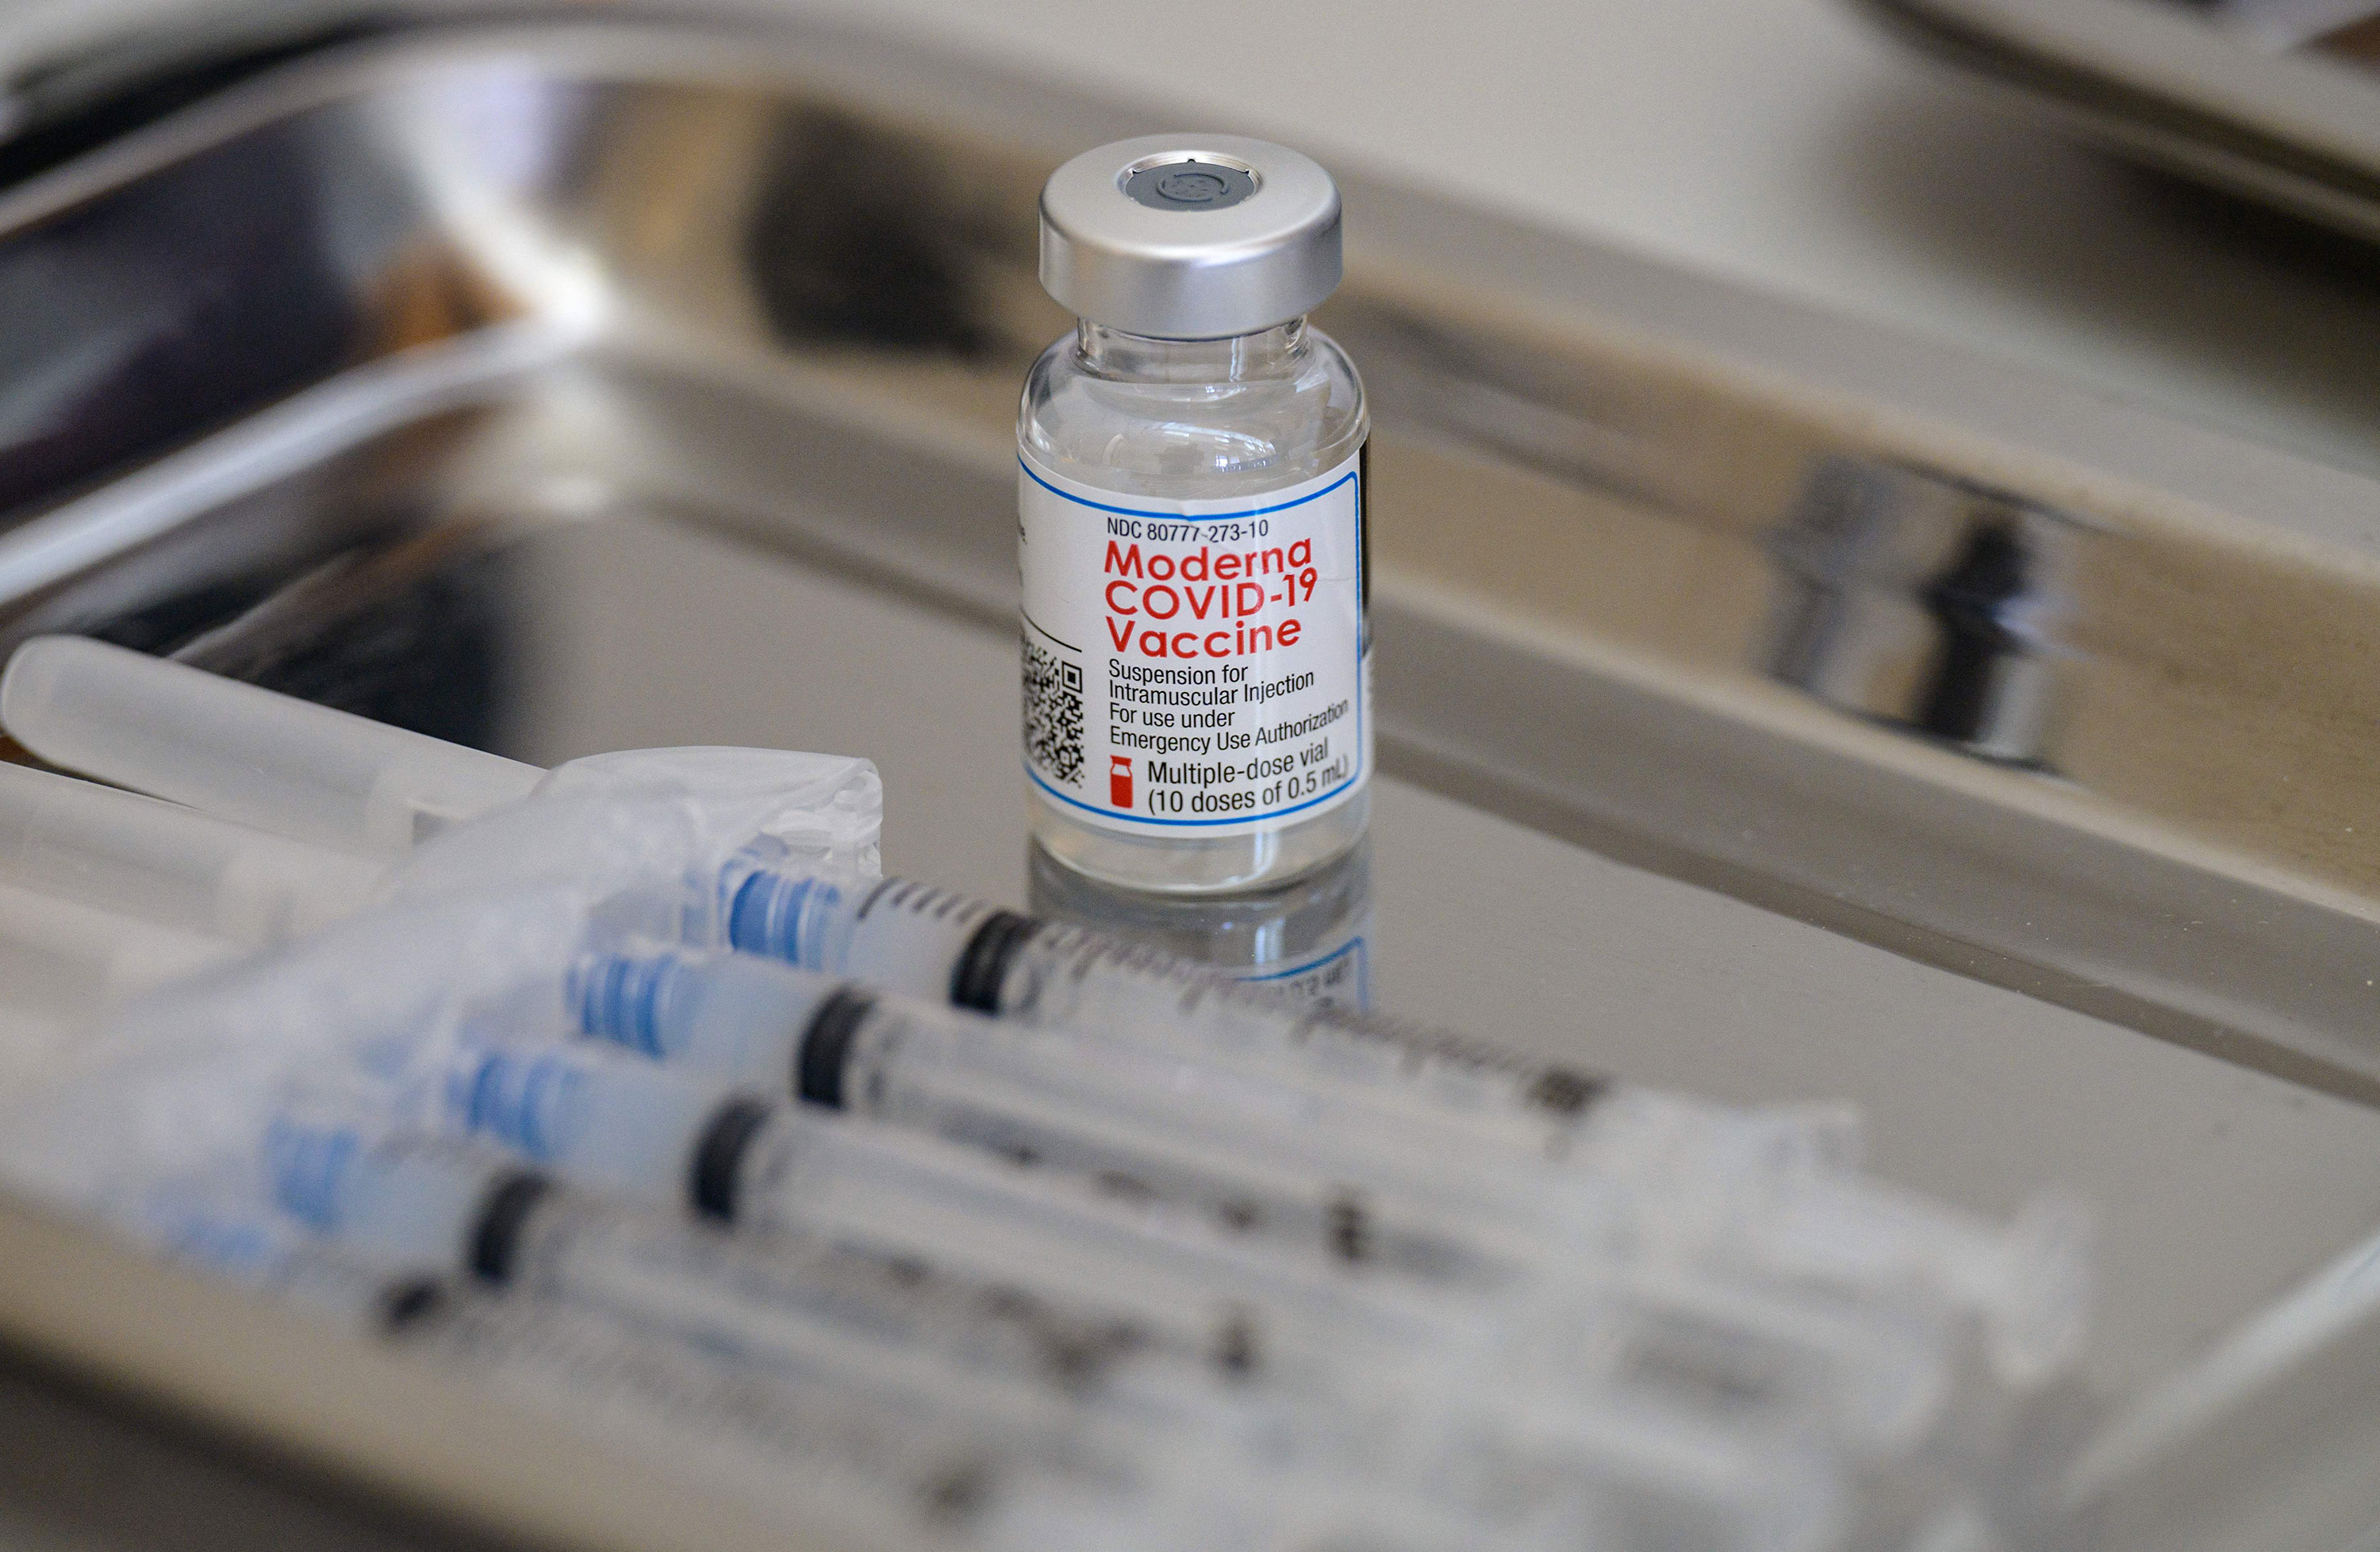 A vial of the Moderna Covid-19 vaccine and syringes are prepared at a pop-up vaccine clinic in Staten Island, New York, on April 16.